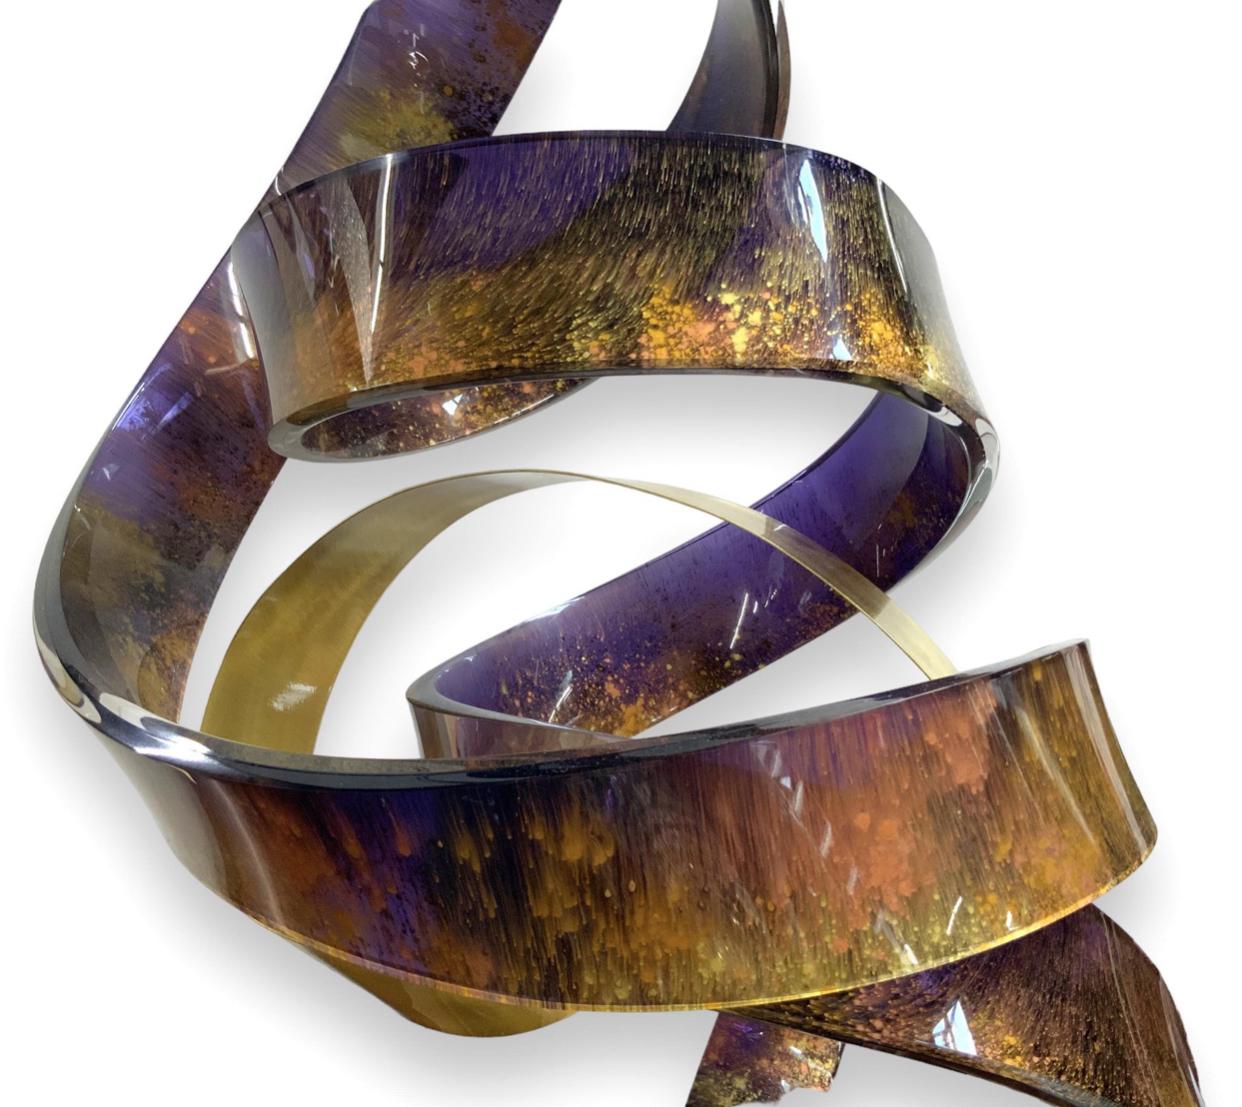 Spiral sculpture constructed of acrylic (lucite), brushed brass and metal by noted artist Shlomi Haziza. Ribbons of violet and gold acrylic along with brass  spiral up from an acrylic base. Signed. 